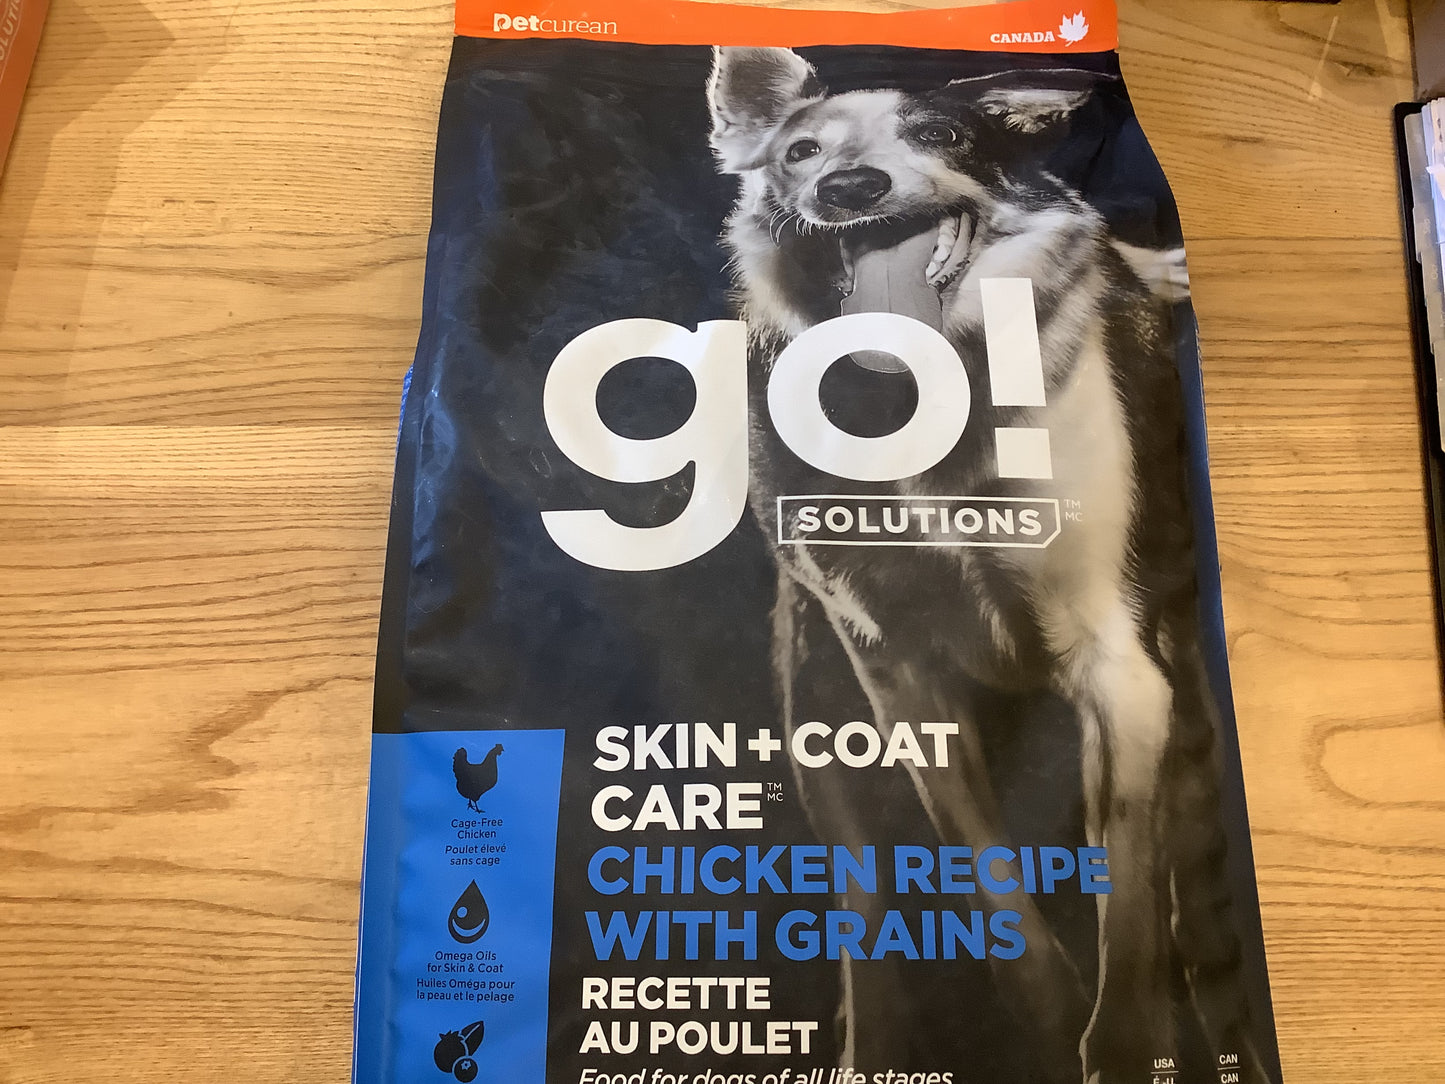 Go! Skin and coat chicken with grains 12lb dog